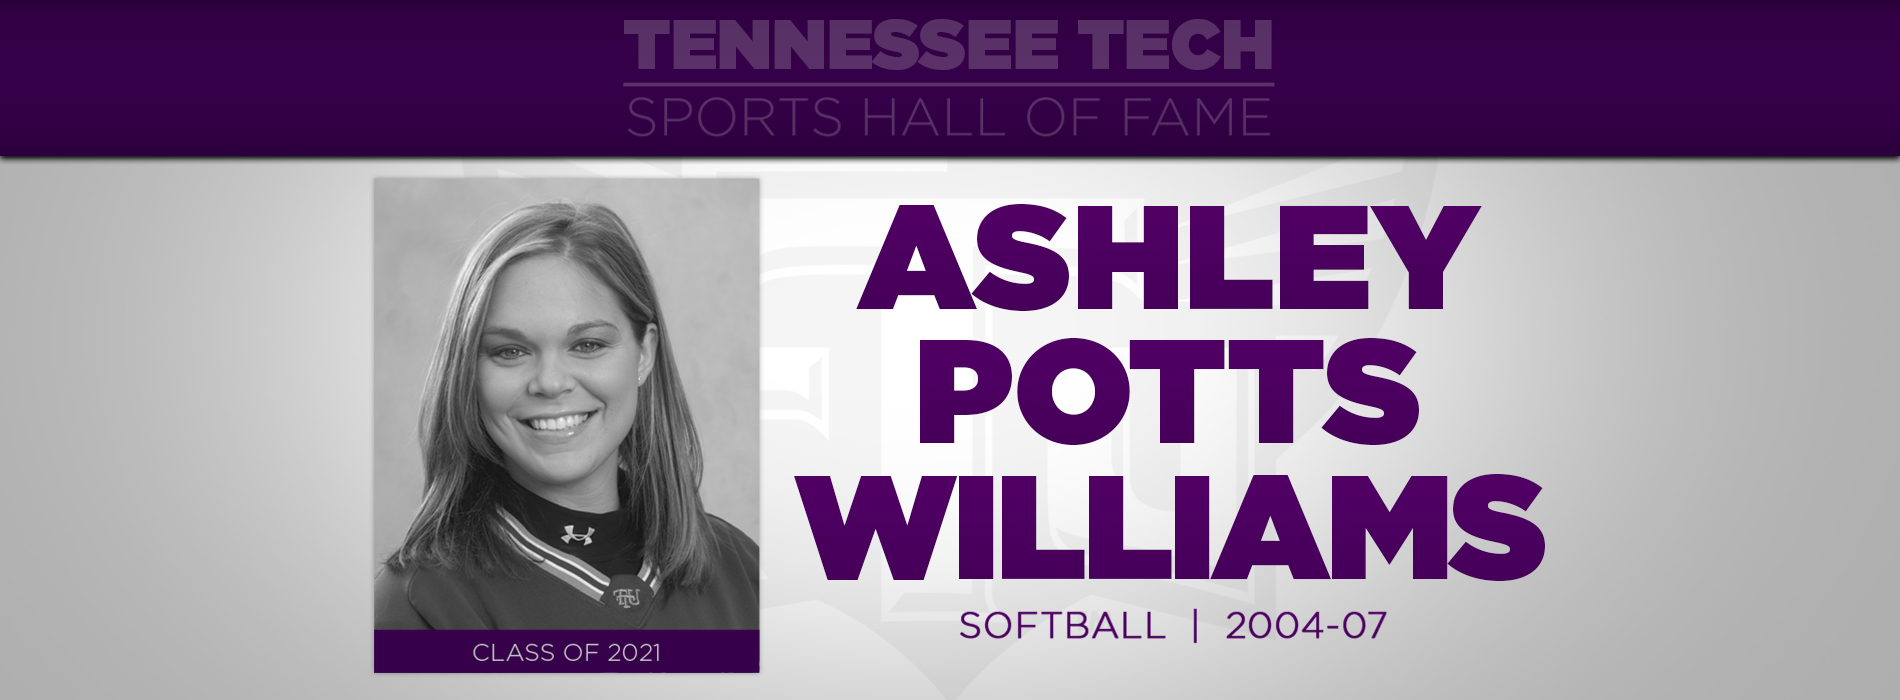 Potts Williams to be inducted into TTU Sports Hall of Fame Friday night